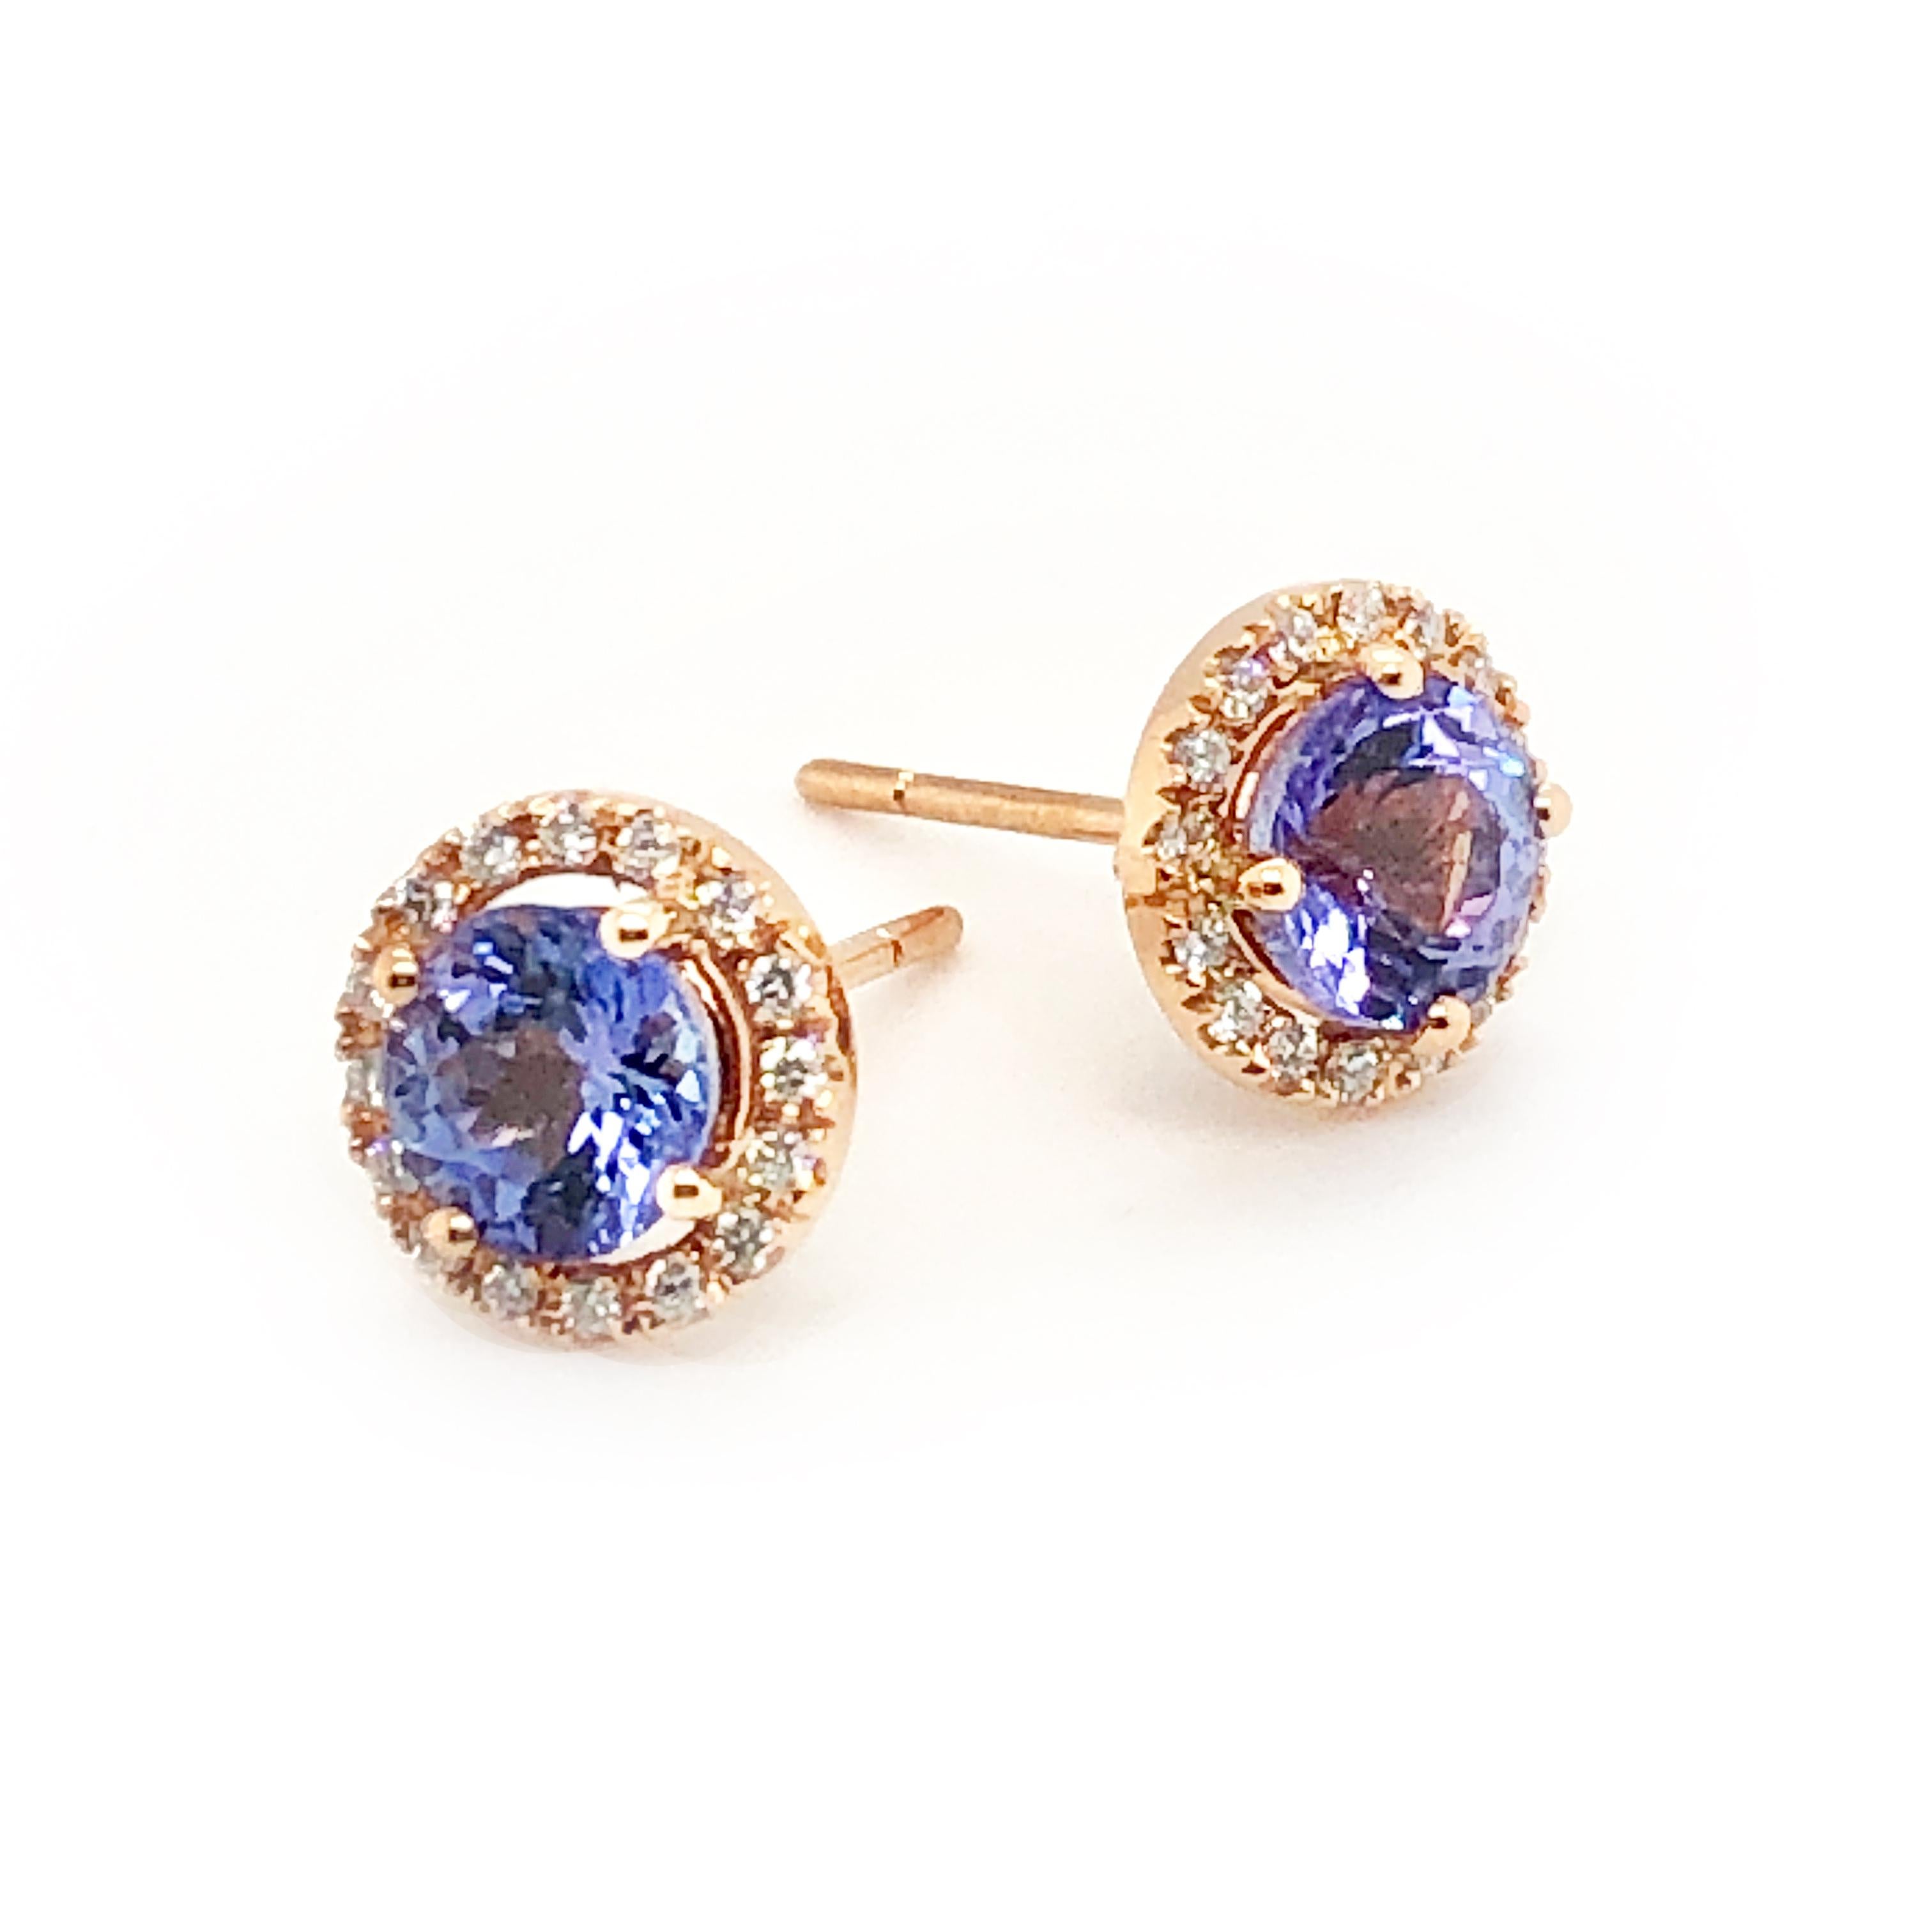 18 Karat Rose Gold Earrings set with 2.0 Carat Tanzanite stones 

Tanzanite Round cut: 5.85mm
The Tanzanite Earrings are set with Collection Grade Diamonds weighing 0.18 carat, Brilliant cut White Diamonds.

Total weight earrings (ex Earring Backs):